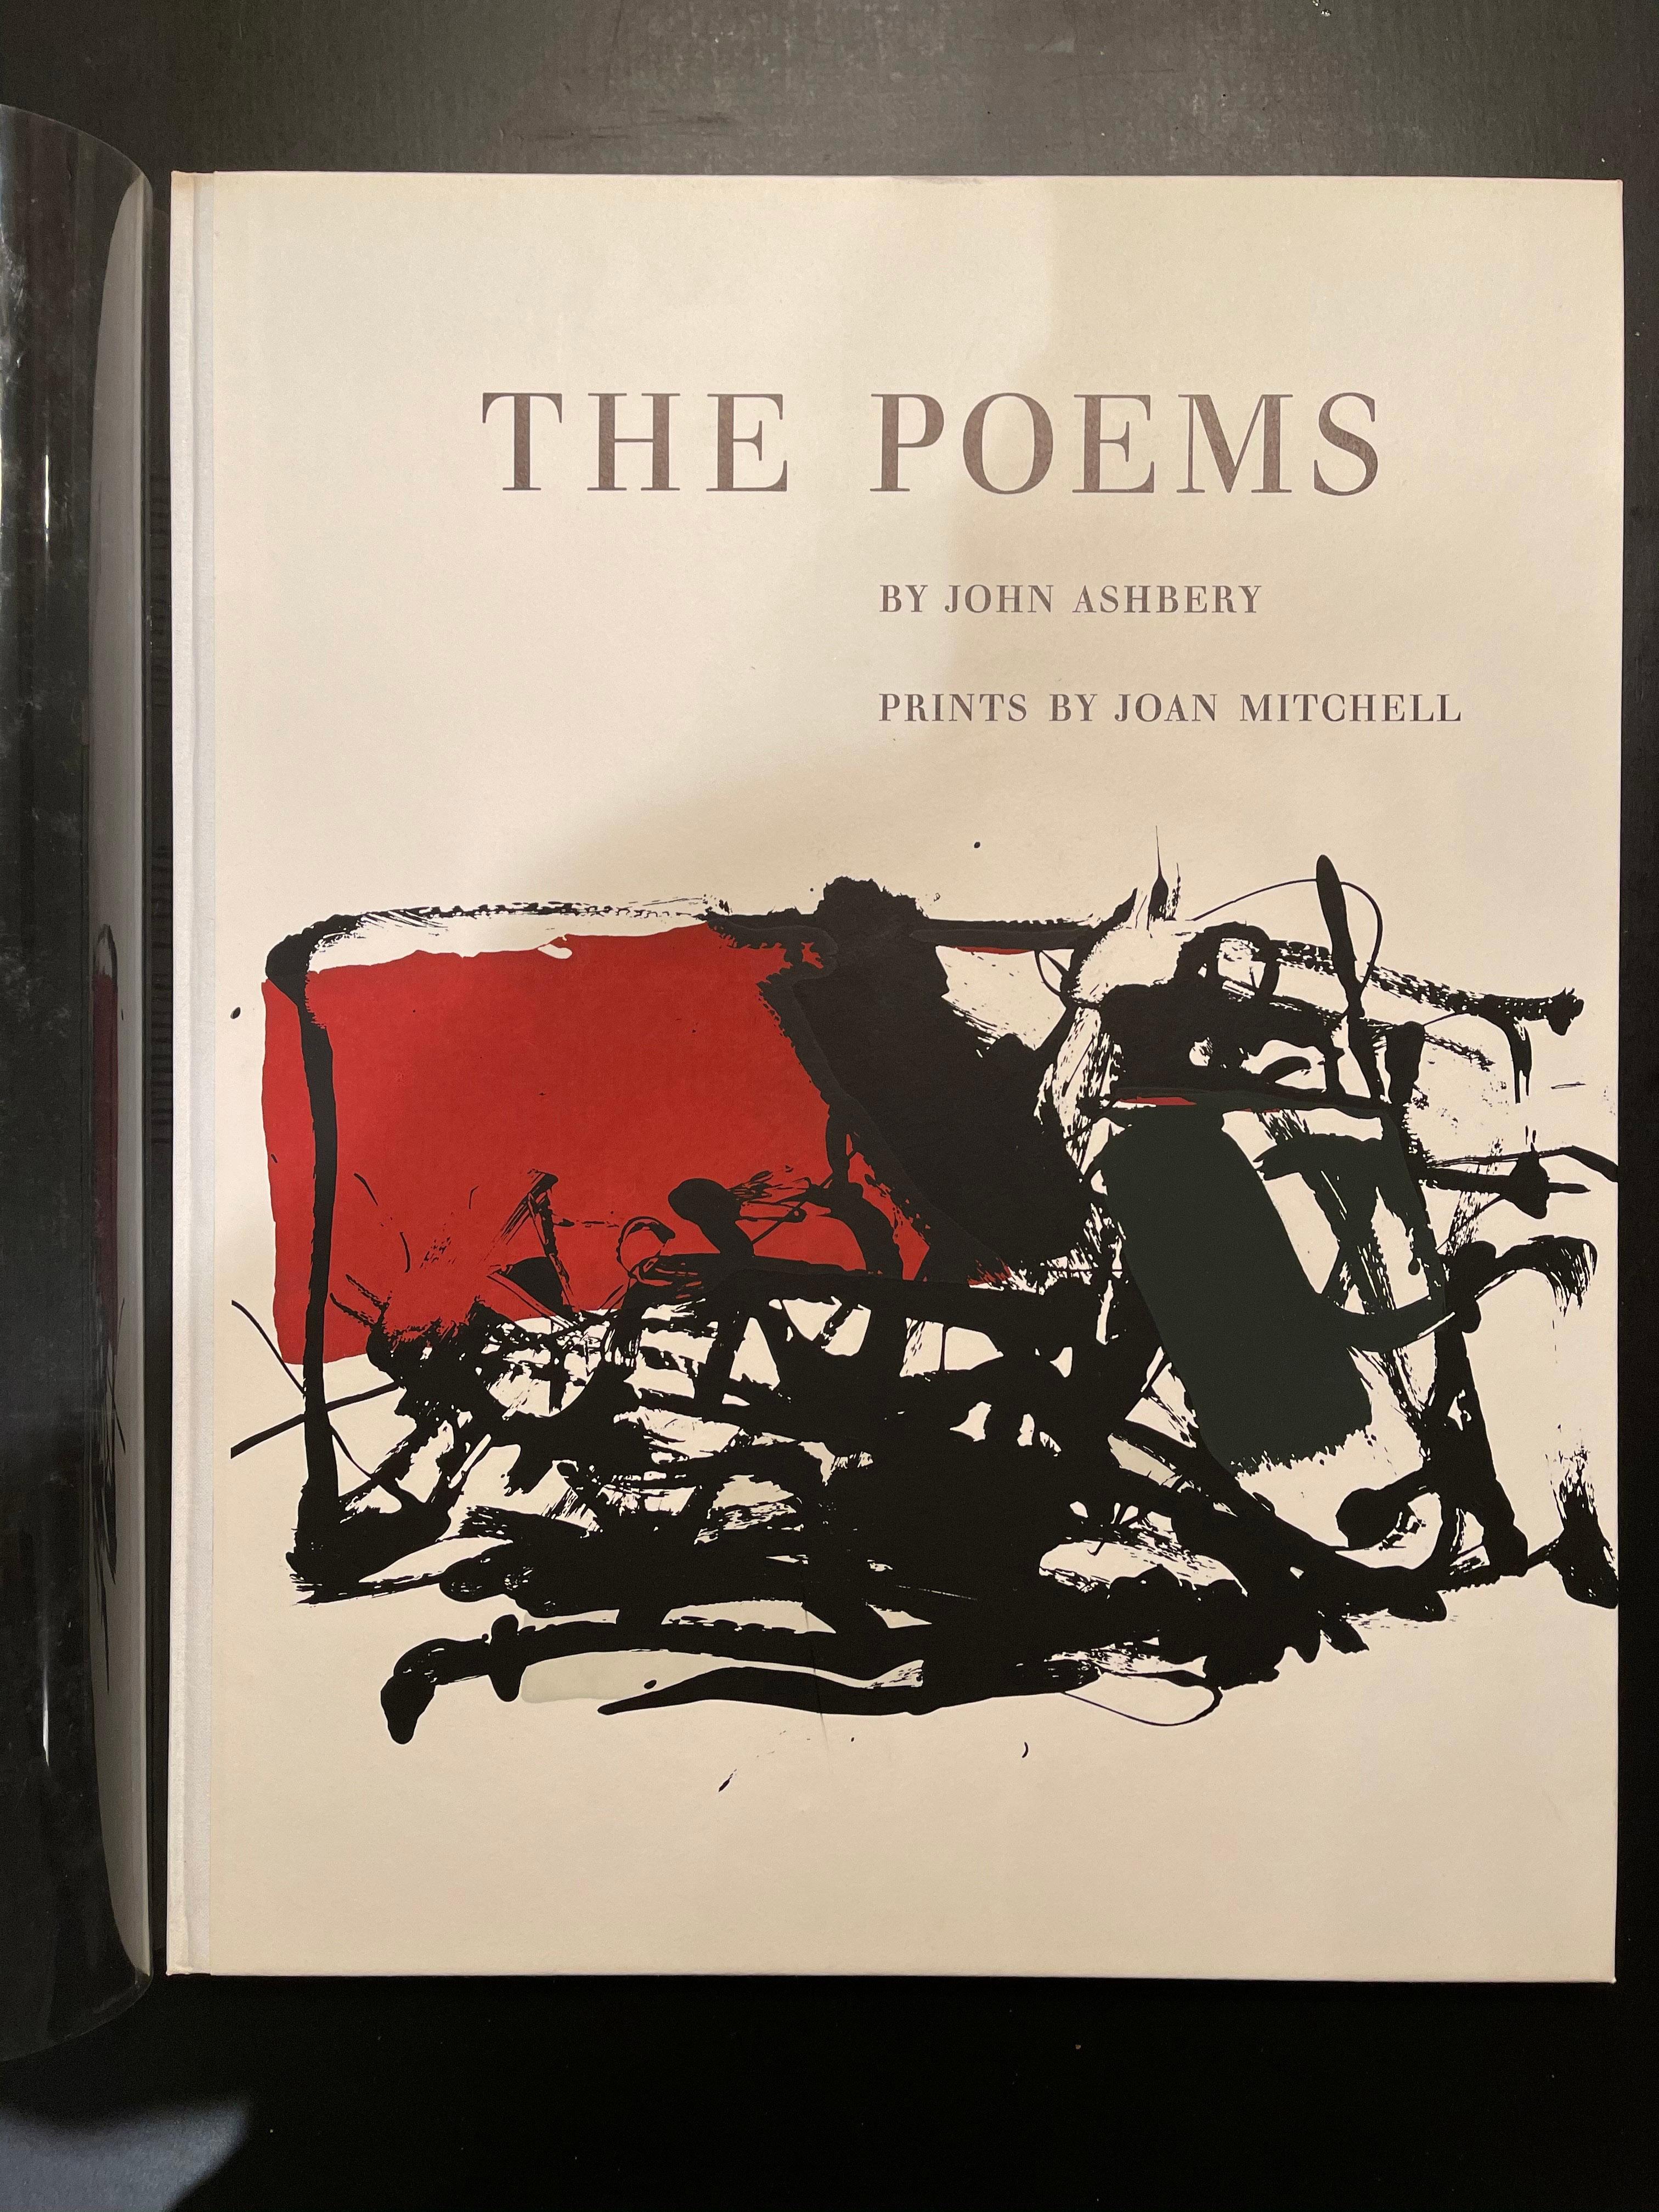 Abstract Print Joan Mitchell - THE NEW YORK School : THE POEMS - SALUTE - ODES - PERMANENTLY